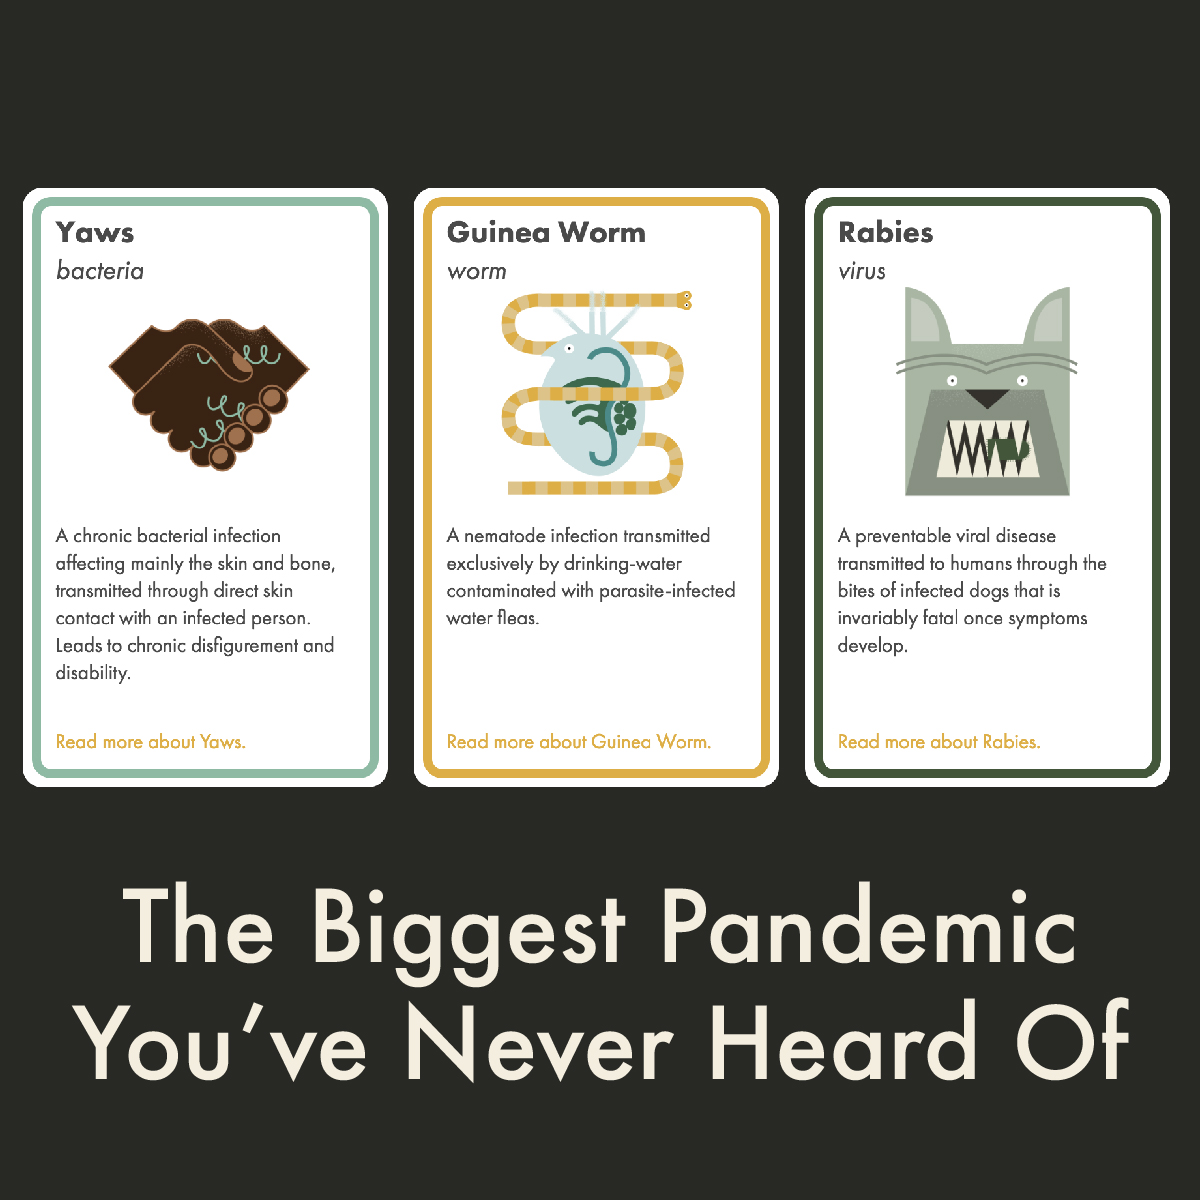 The Biggest Pandemic You've Never Heard Of